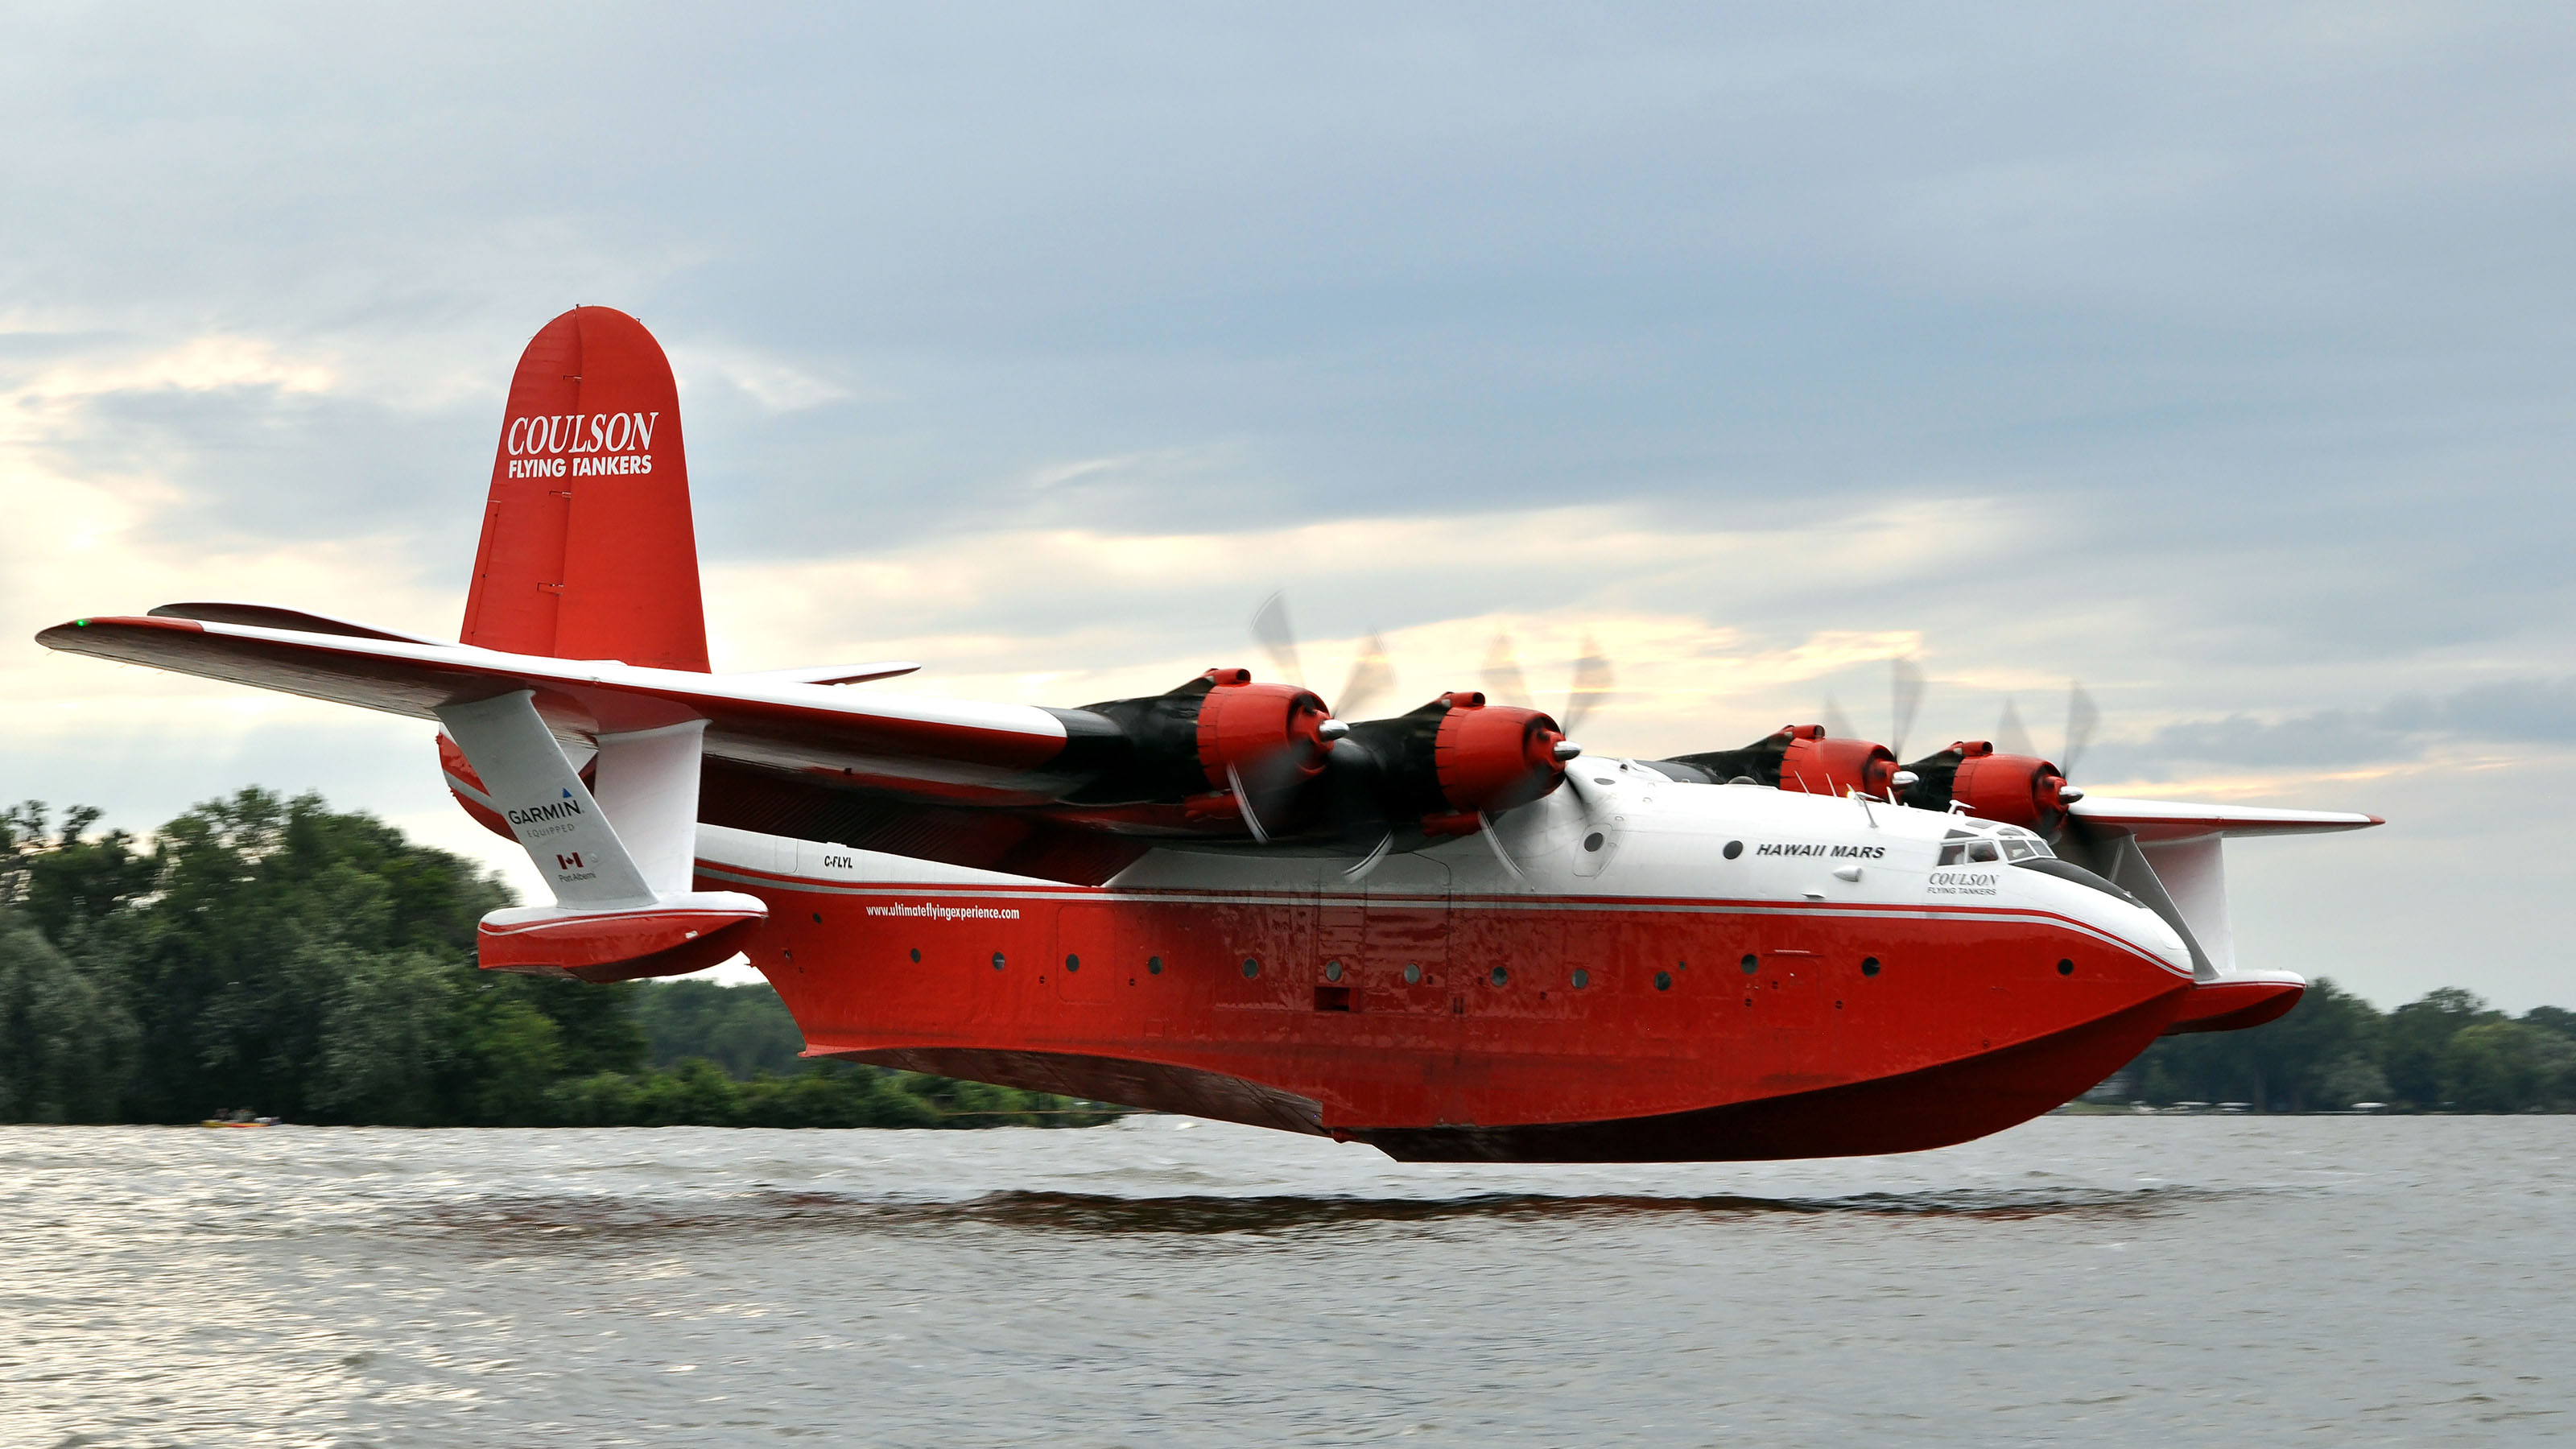 Coulson Aviation's Martin Mars water tanker approaches for a landing at Lake Winnebago. Photo by Mark Evans.